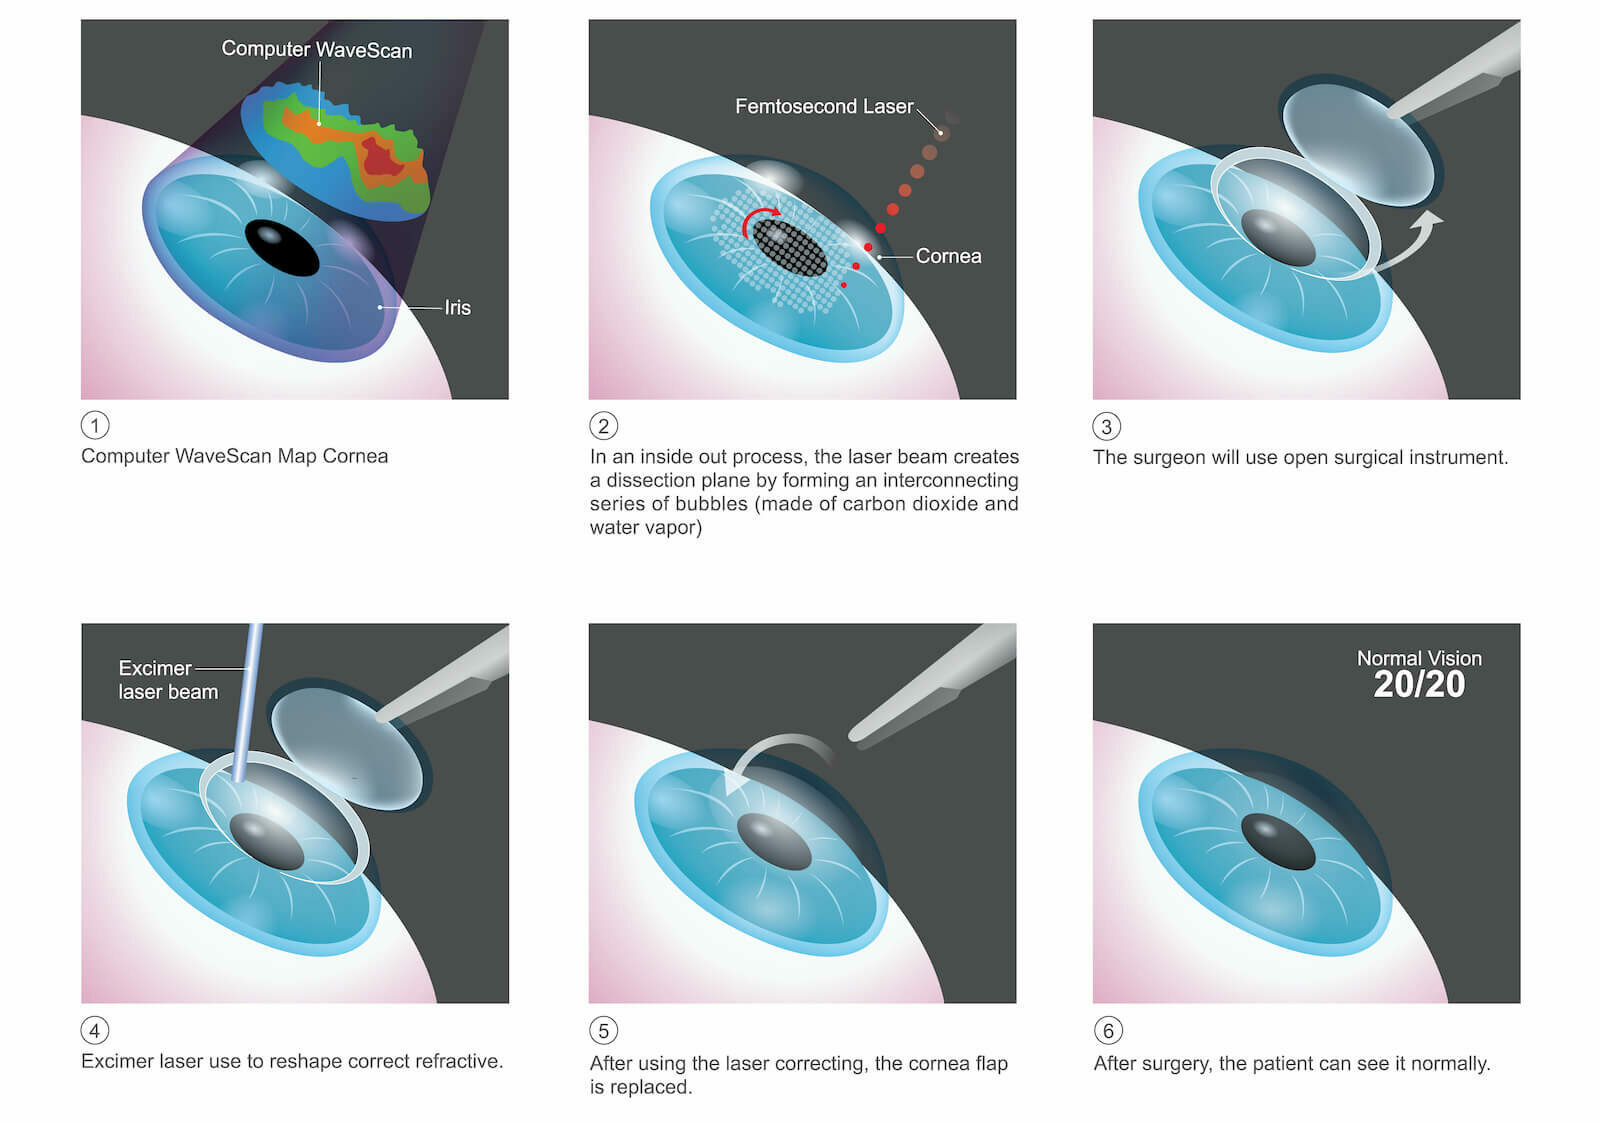 The method used by Blade-free LASIK lasers to create cornea flaps is claimed to enhance the safety of LASIK surgery.